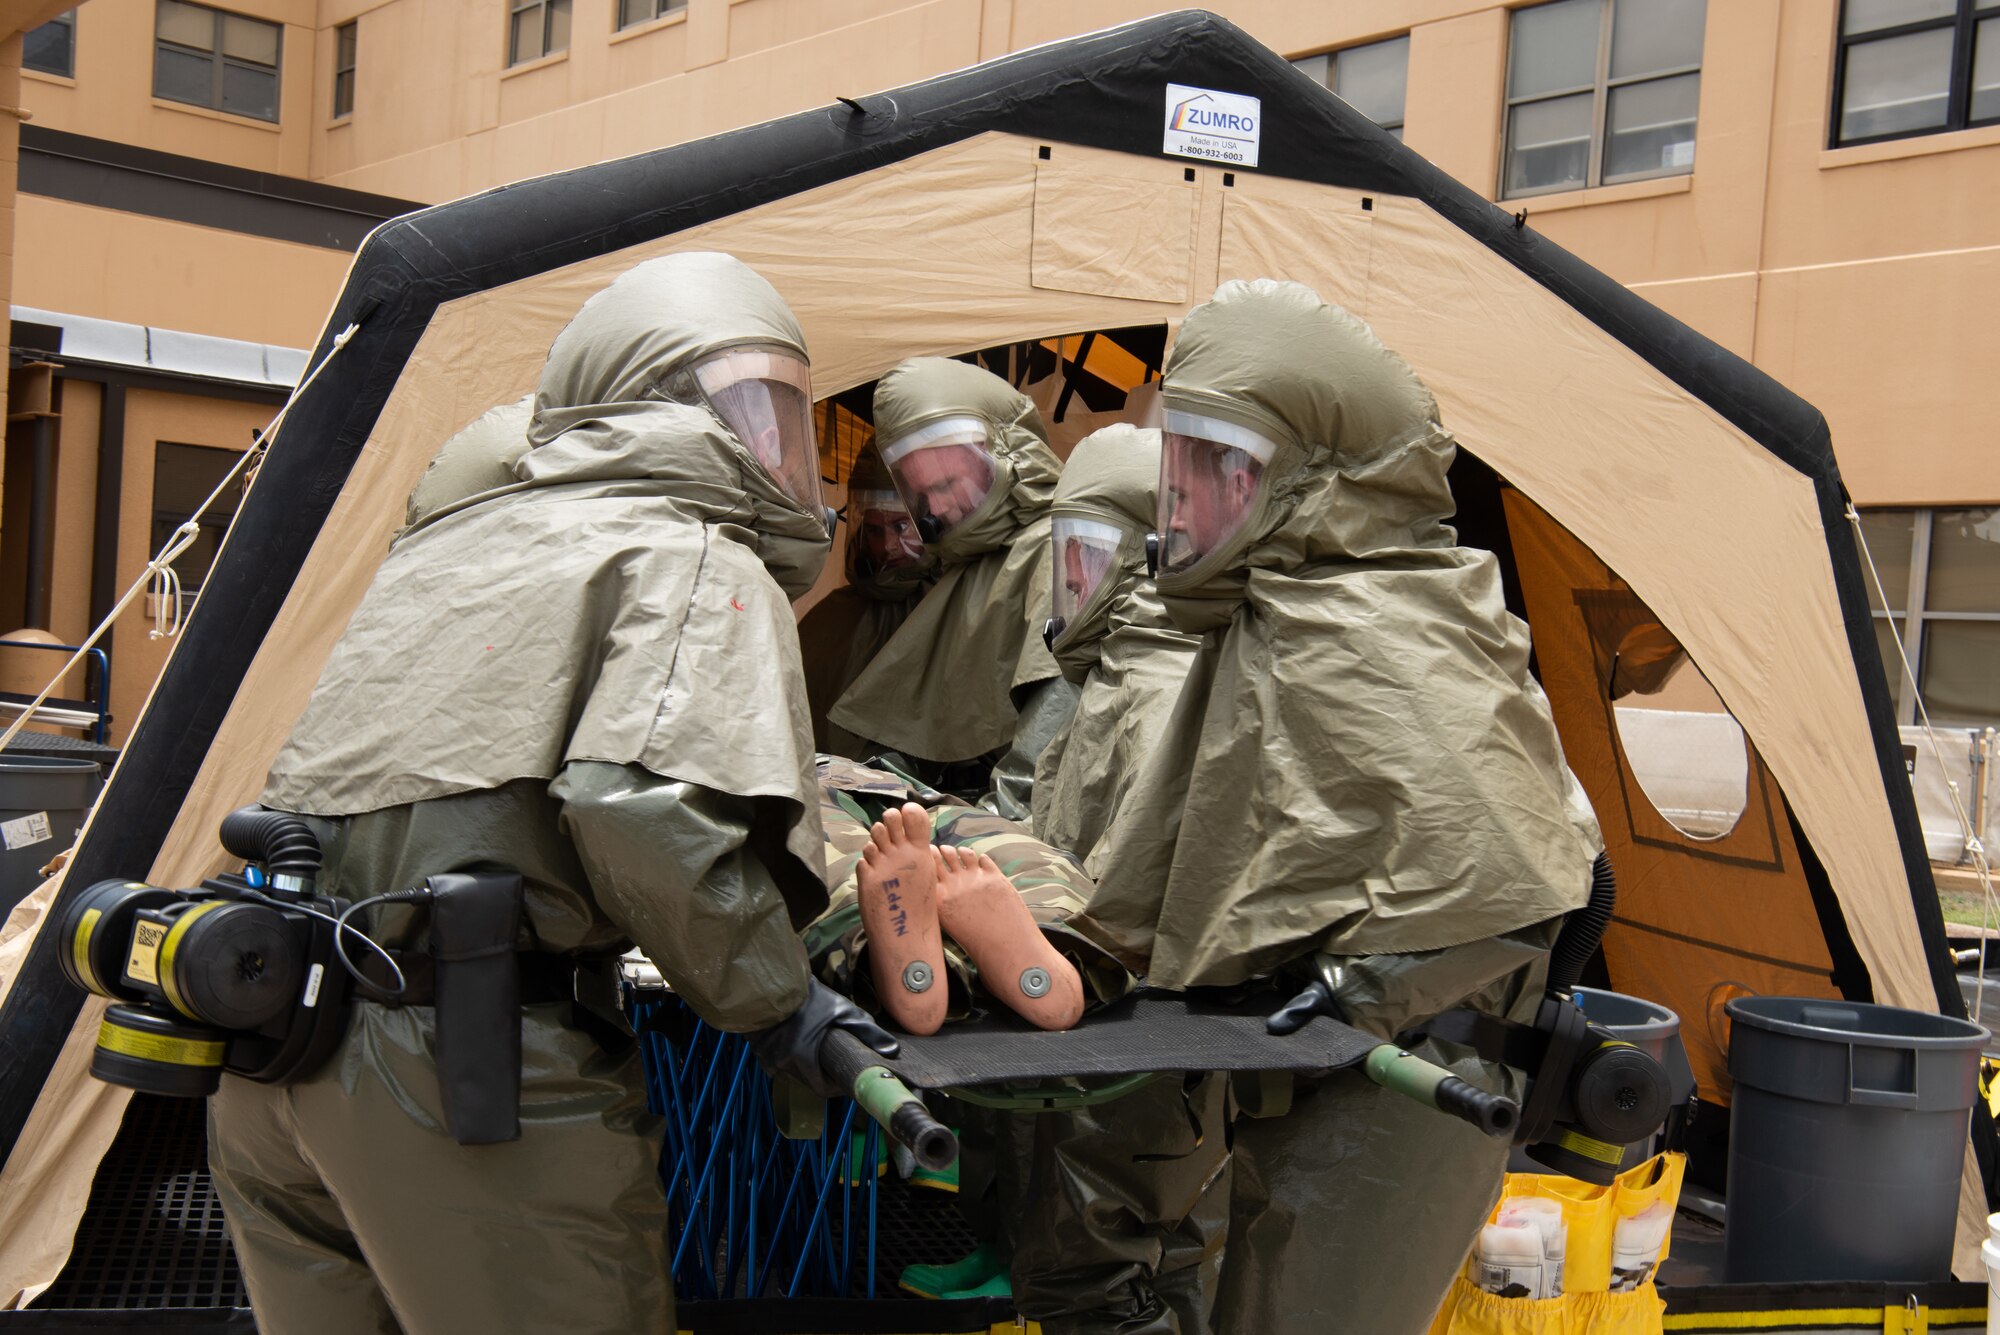 Airmen assigned to the 7th Medical Group implement decontamination procedures during an exercise at Dyess Air Force Base, Texas, June 1, 2023. The exercise required the completion of a three-day training course that tested Airmen’s medical disaster response. (U.S. Air Force photo by Airman 1st Class Alondra Cristobal Hernandez)